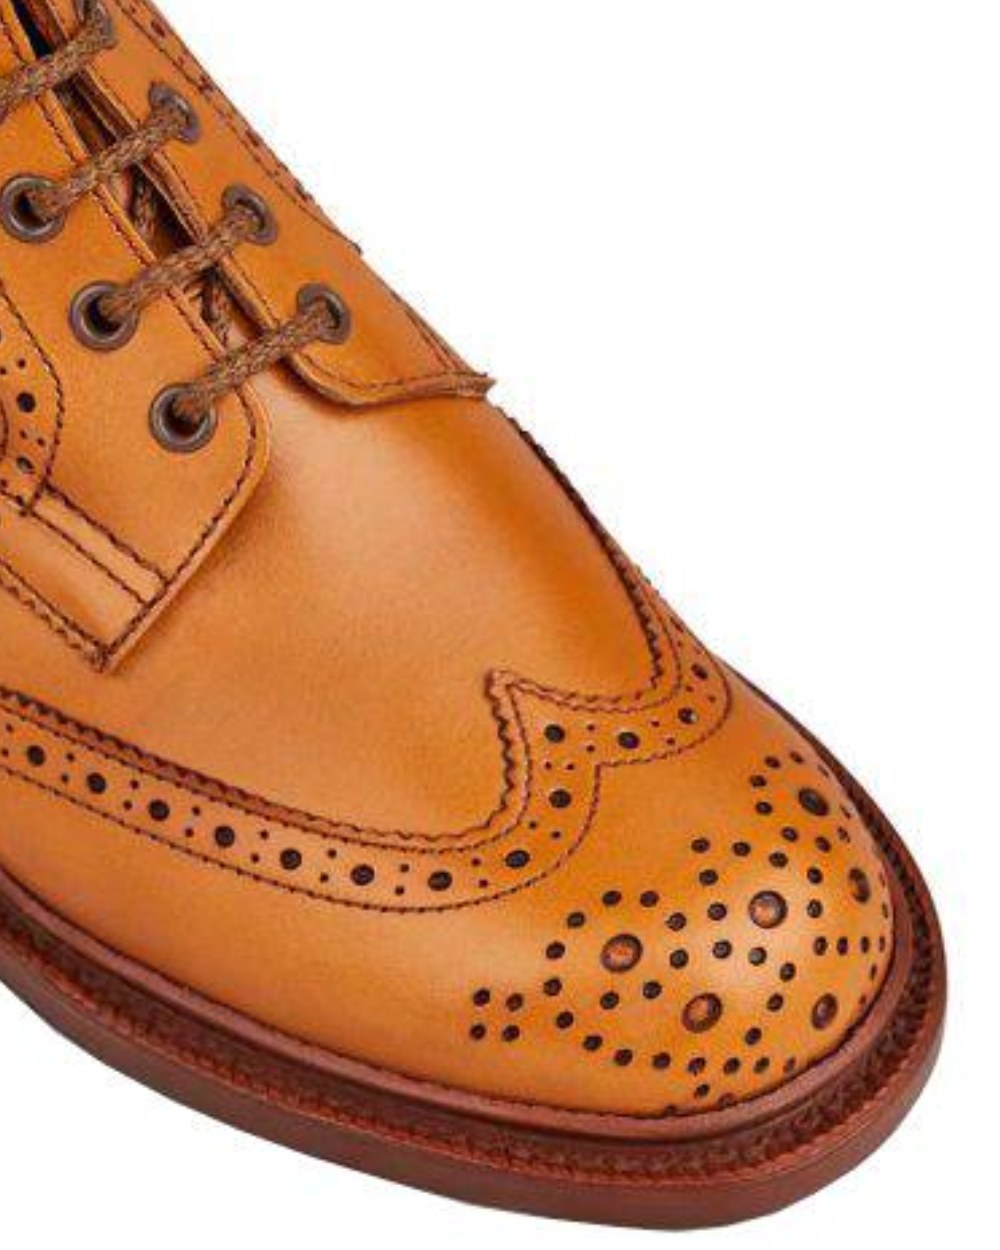 Acorn Antique Coloured Trickers Stephy Brogue Boot On A White Background 